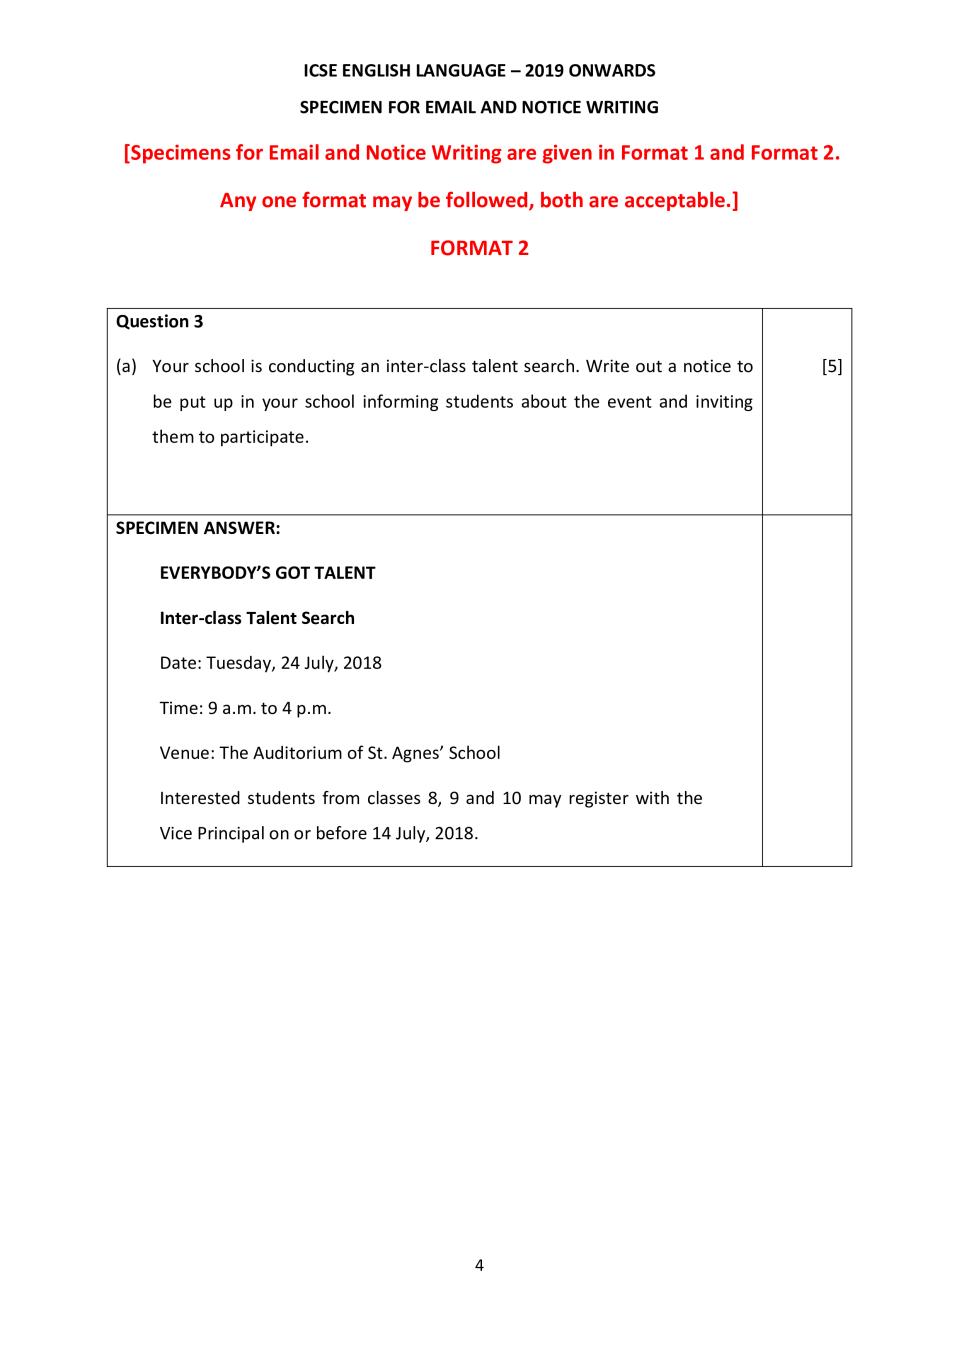 ICSE Class 28 E-mail and Notice Writing Sample Paper 28 - 28